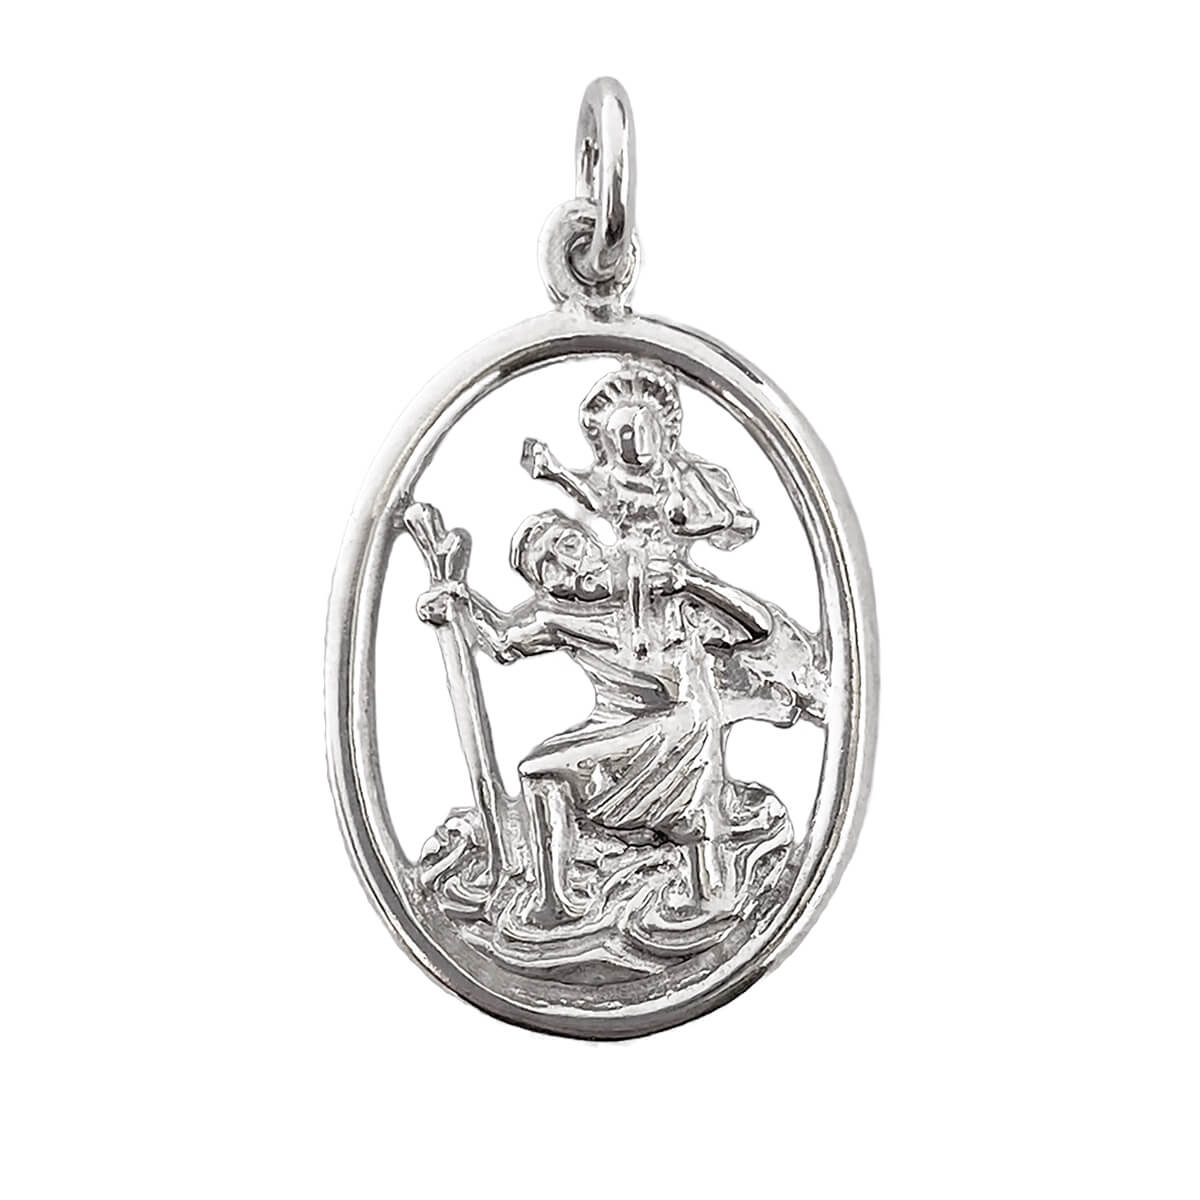 Saint Christopher Charm Sterling Silver Religion Pendant from Charmarama